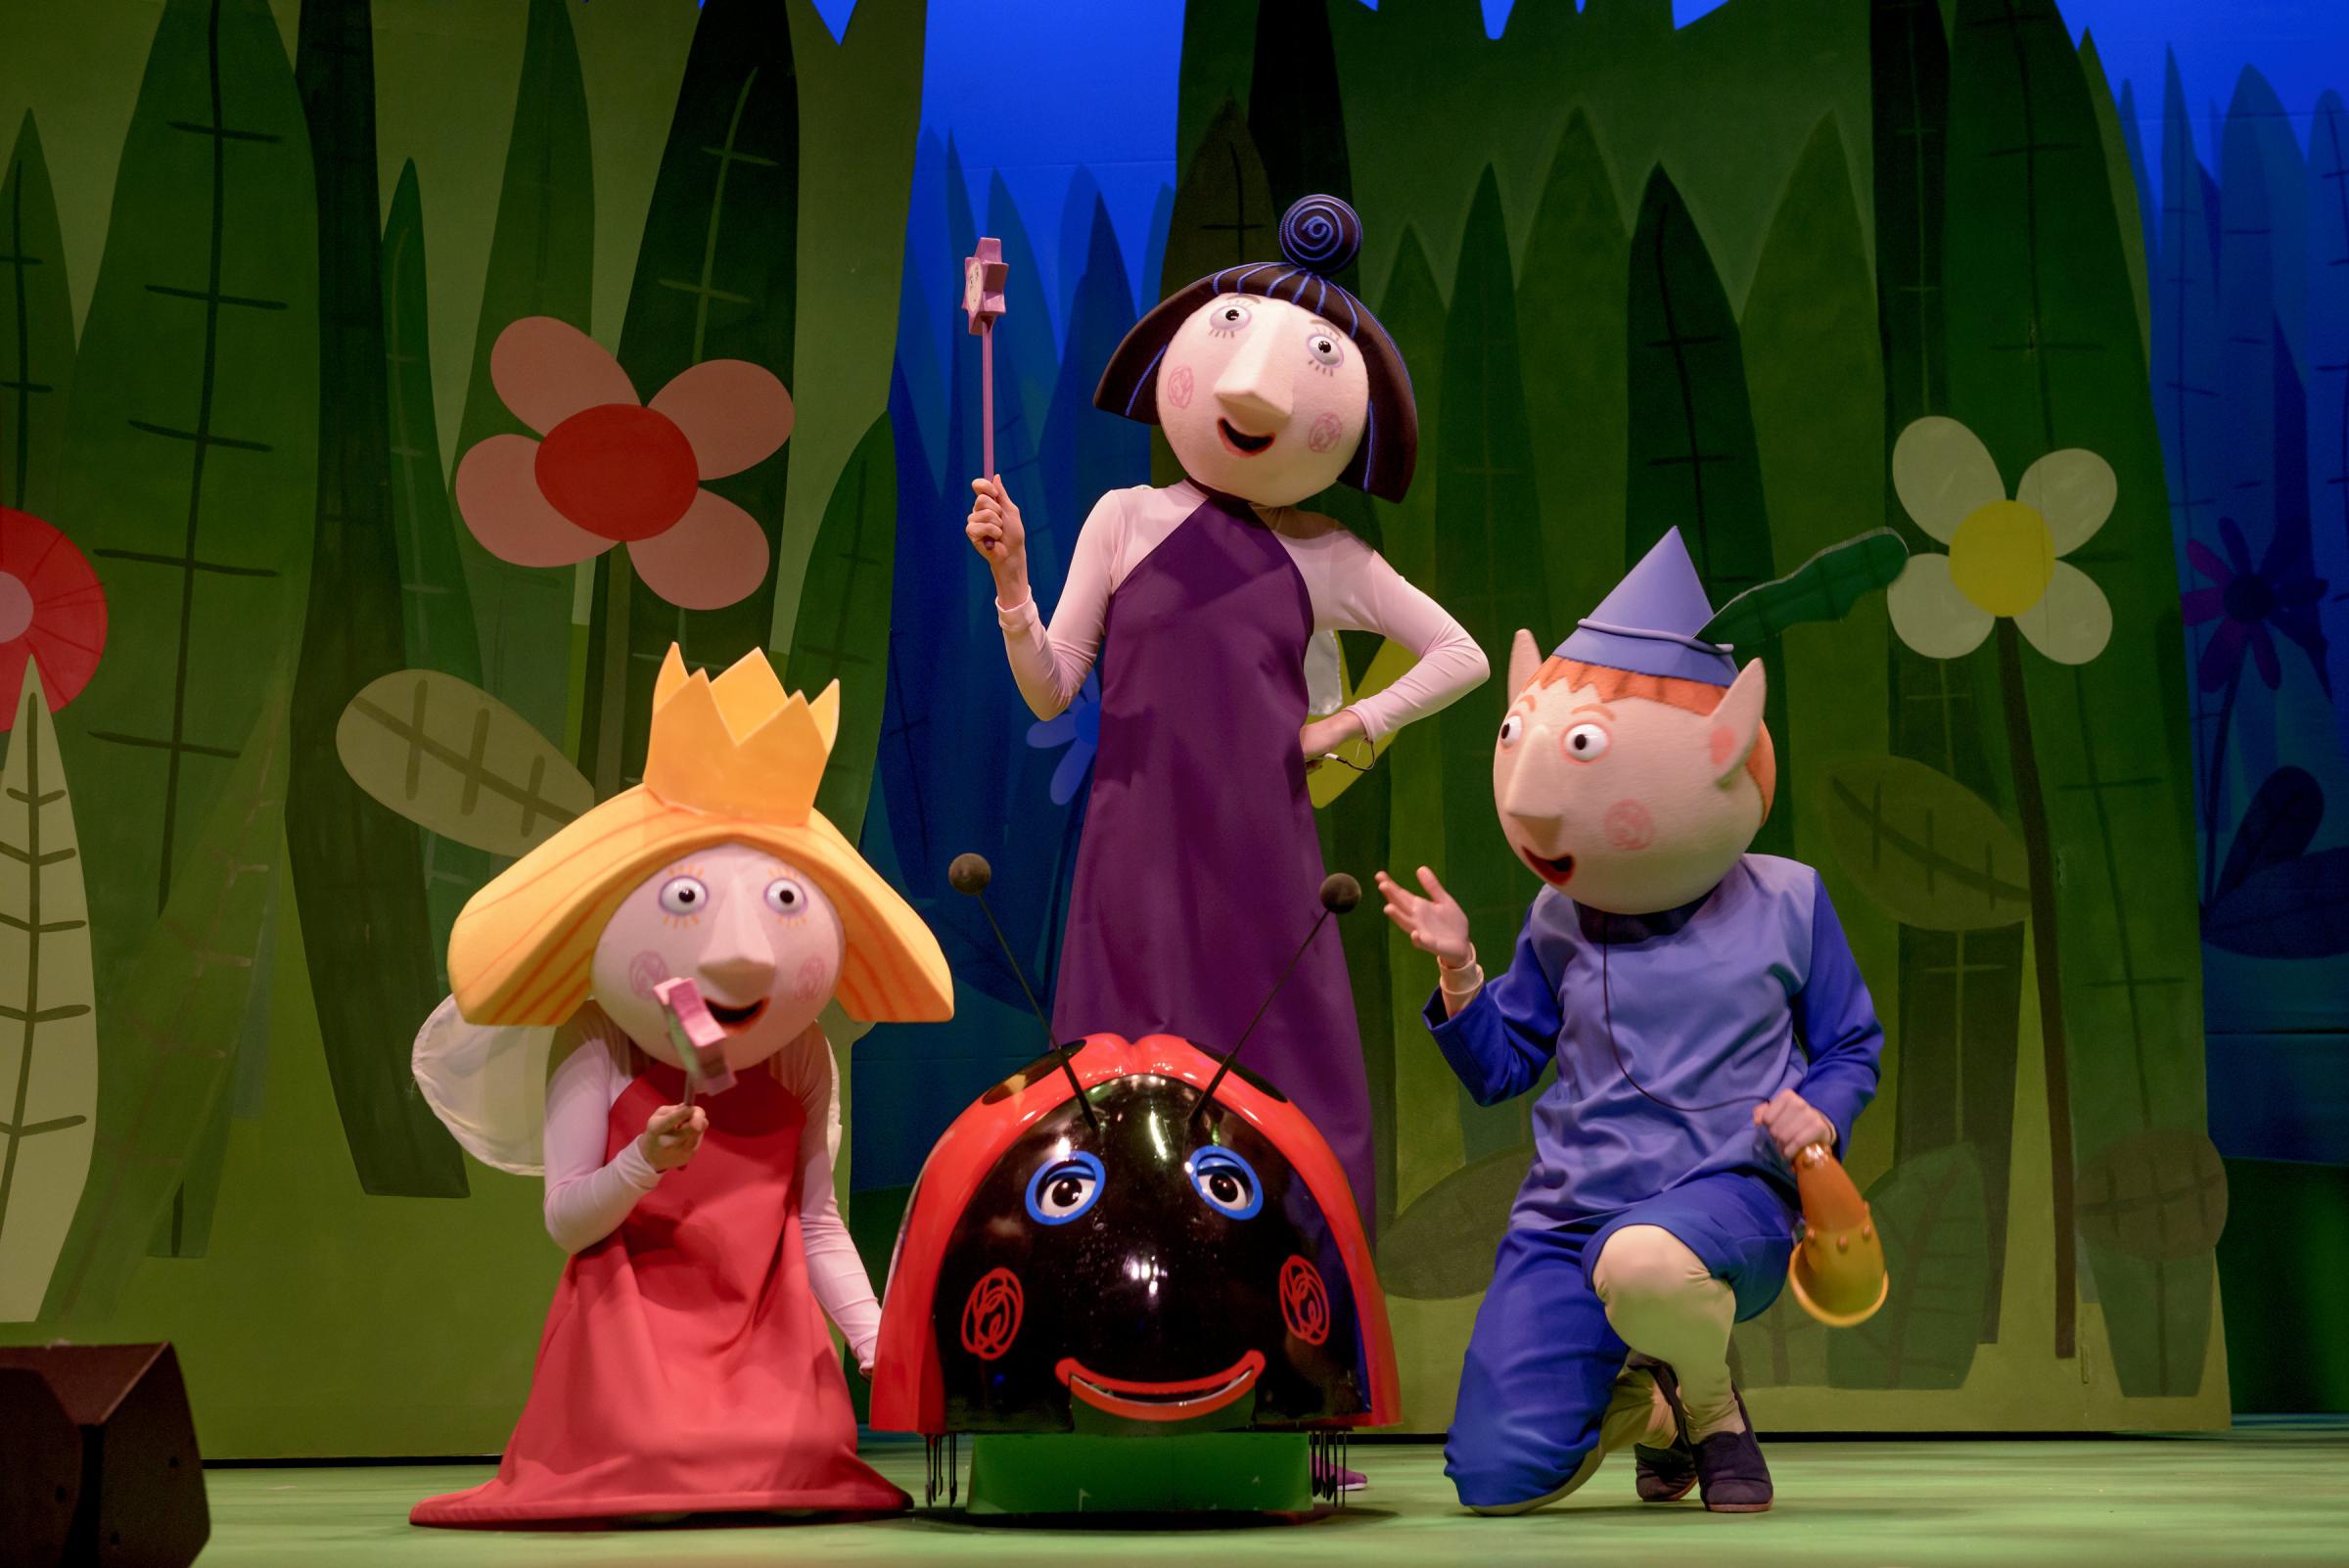 Children's TV show comes to life on stage